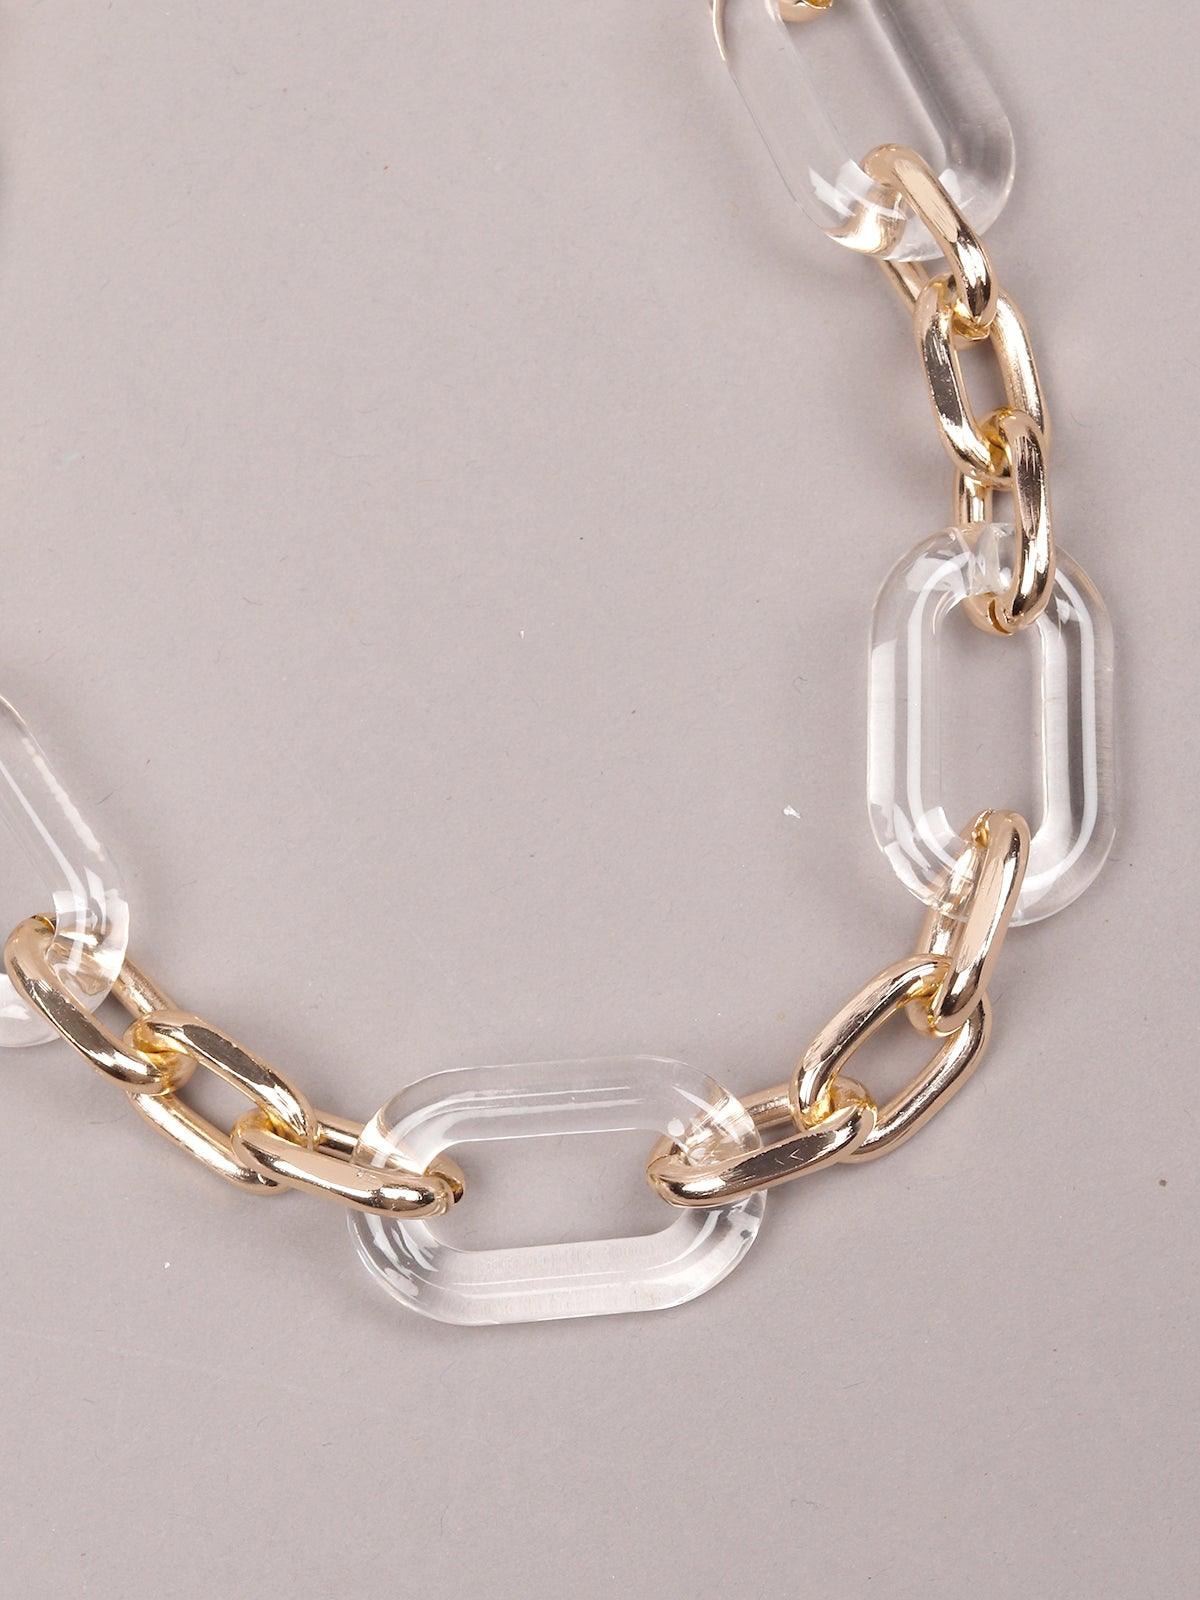 Women's Transparent And Gold-Tone Interlinked Chained Necklace - Odette